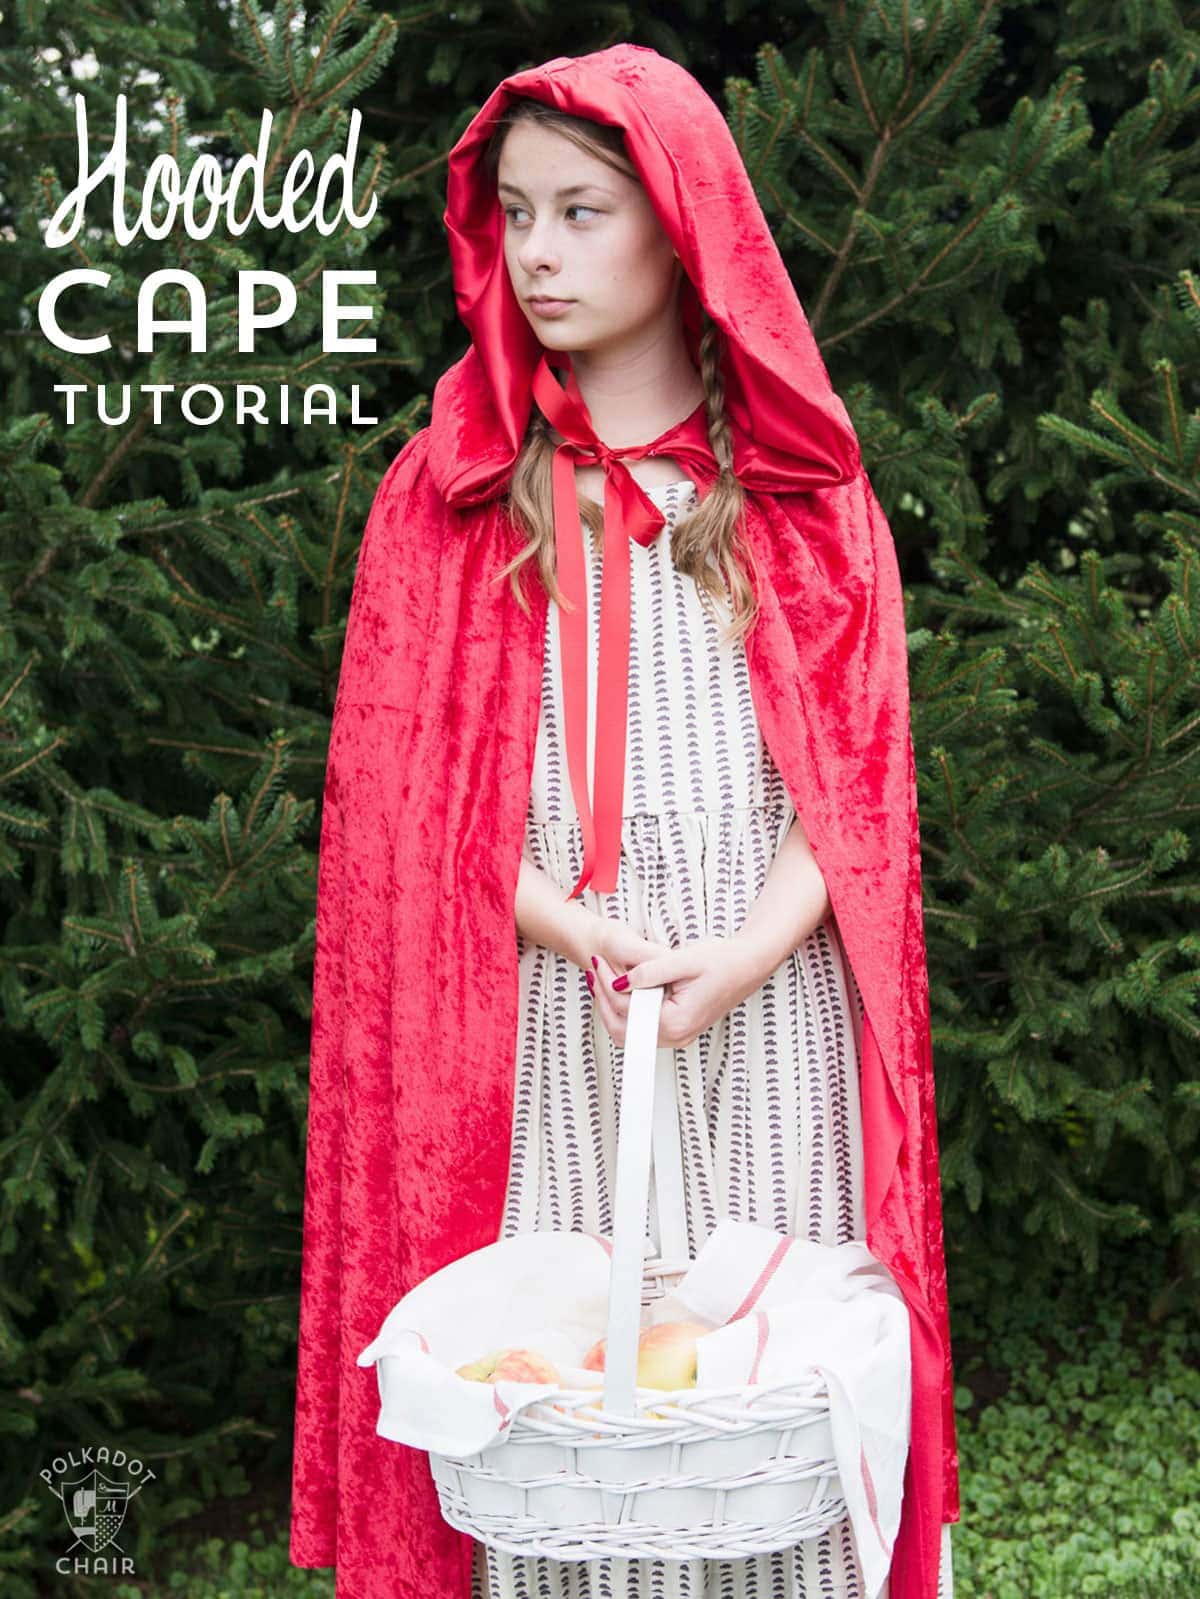 How to make a hooded cape for Halloween - tutorial teaches you how to resize it for kids or adults 